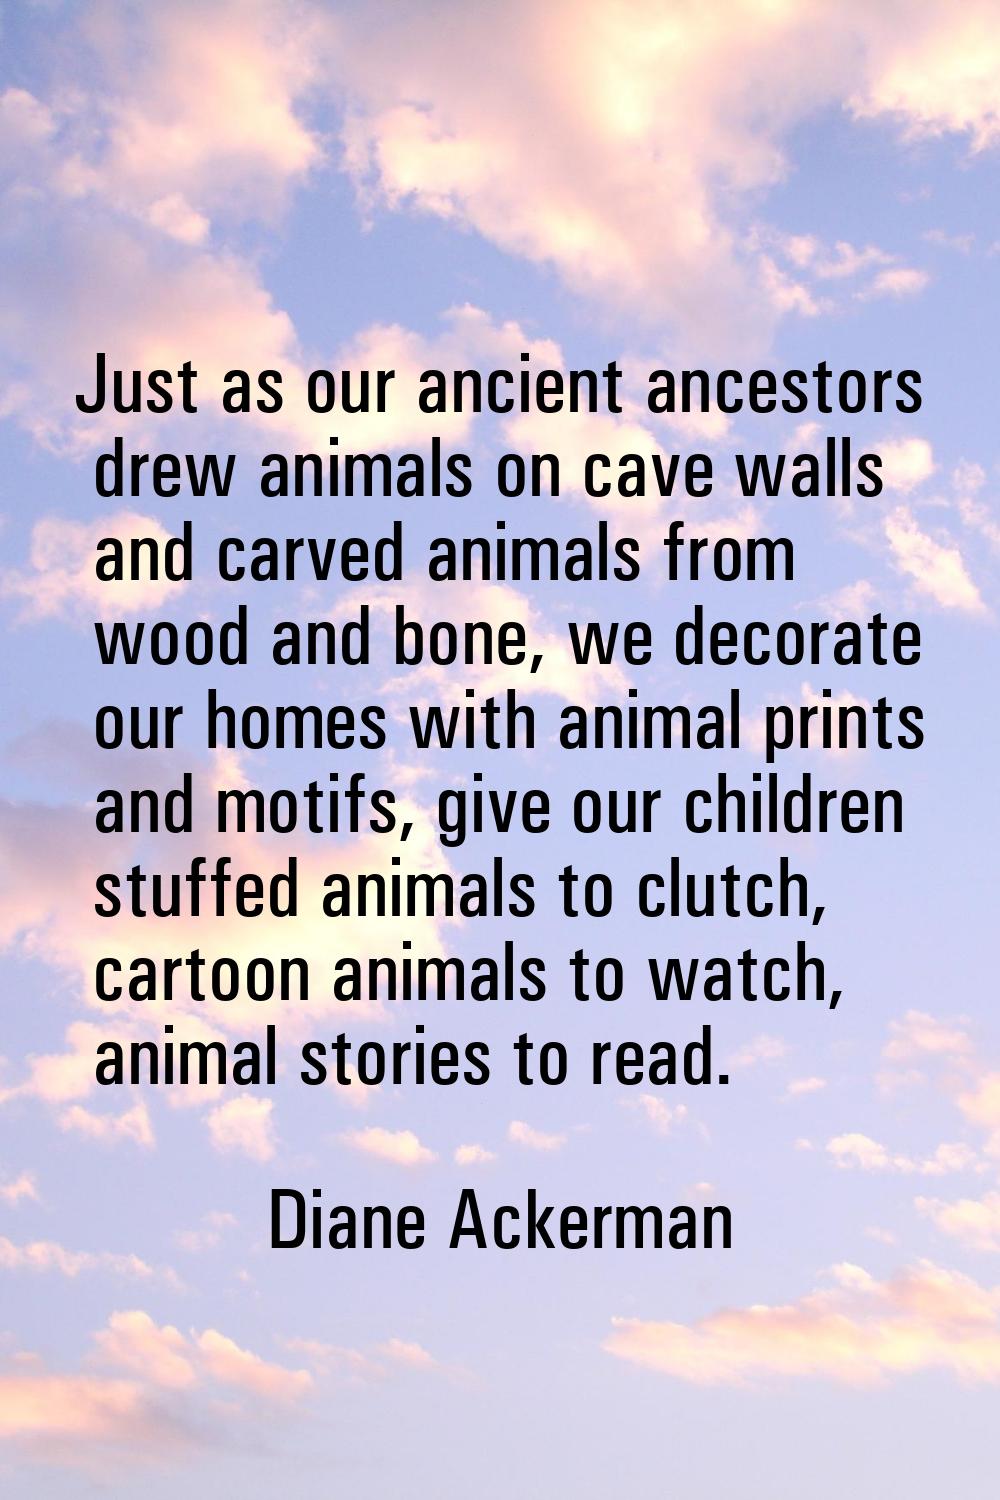 Just as our ancient ancestors drew animals on cave walls and carved animals from wood and bone, we 